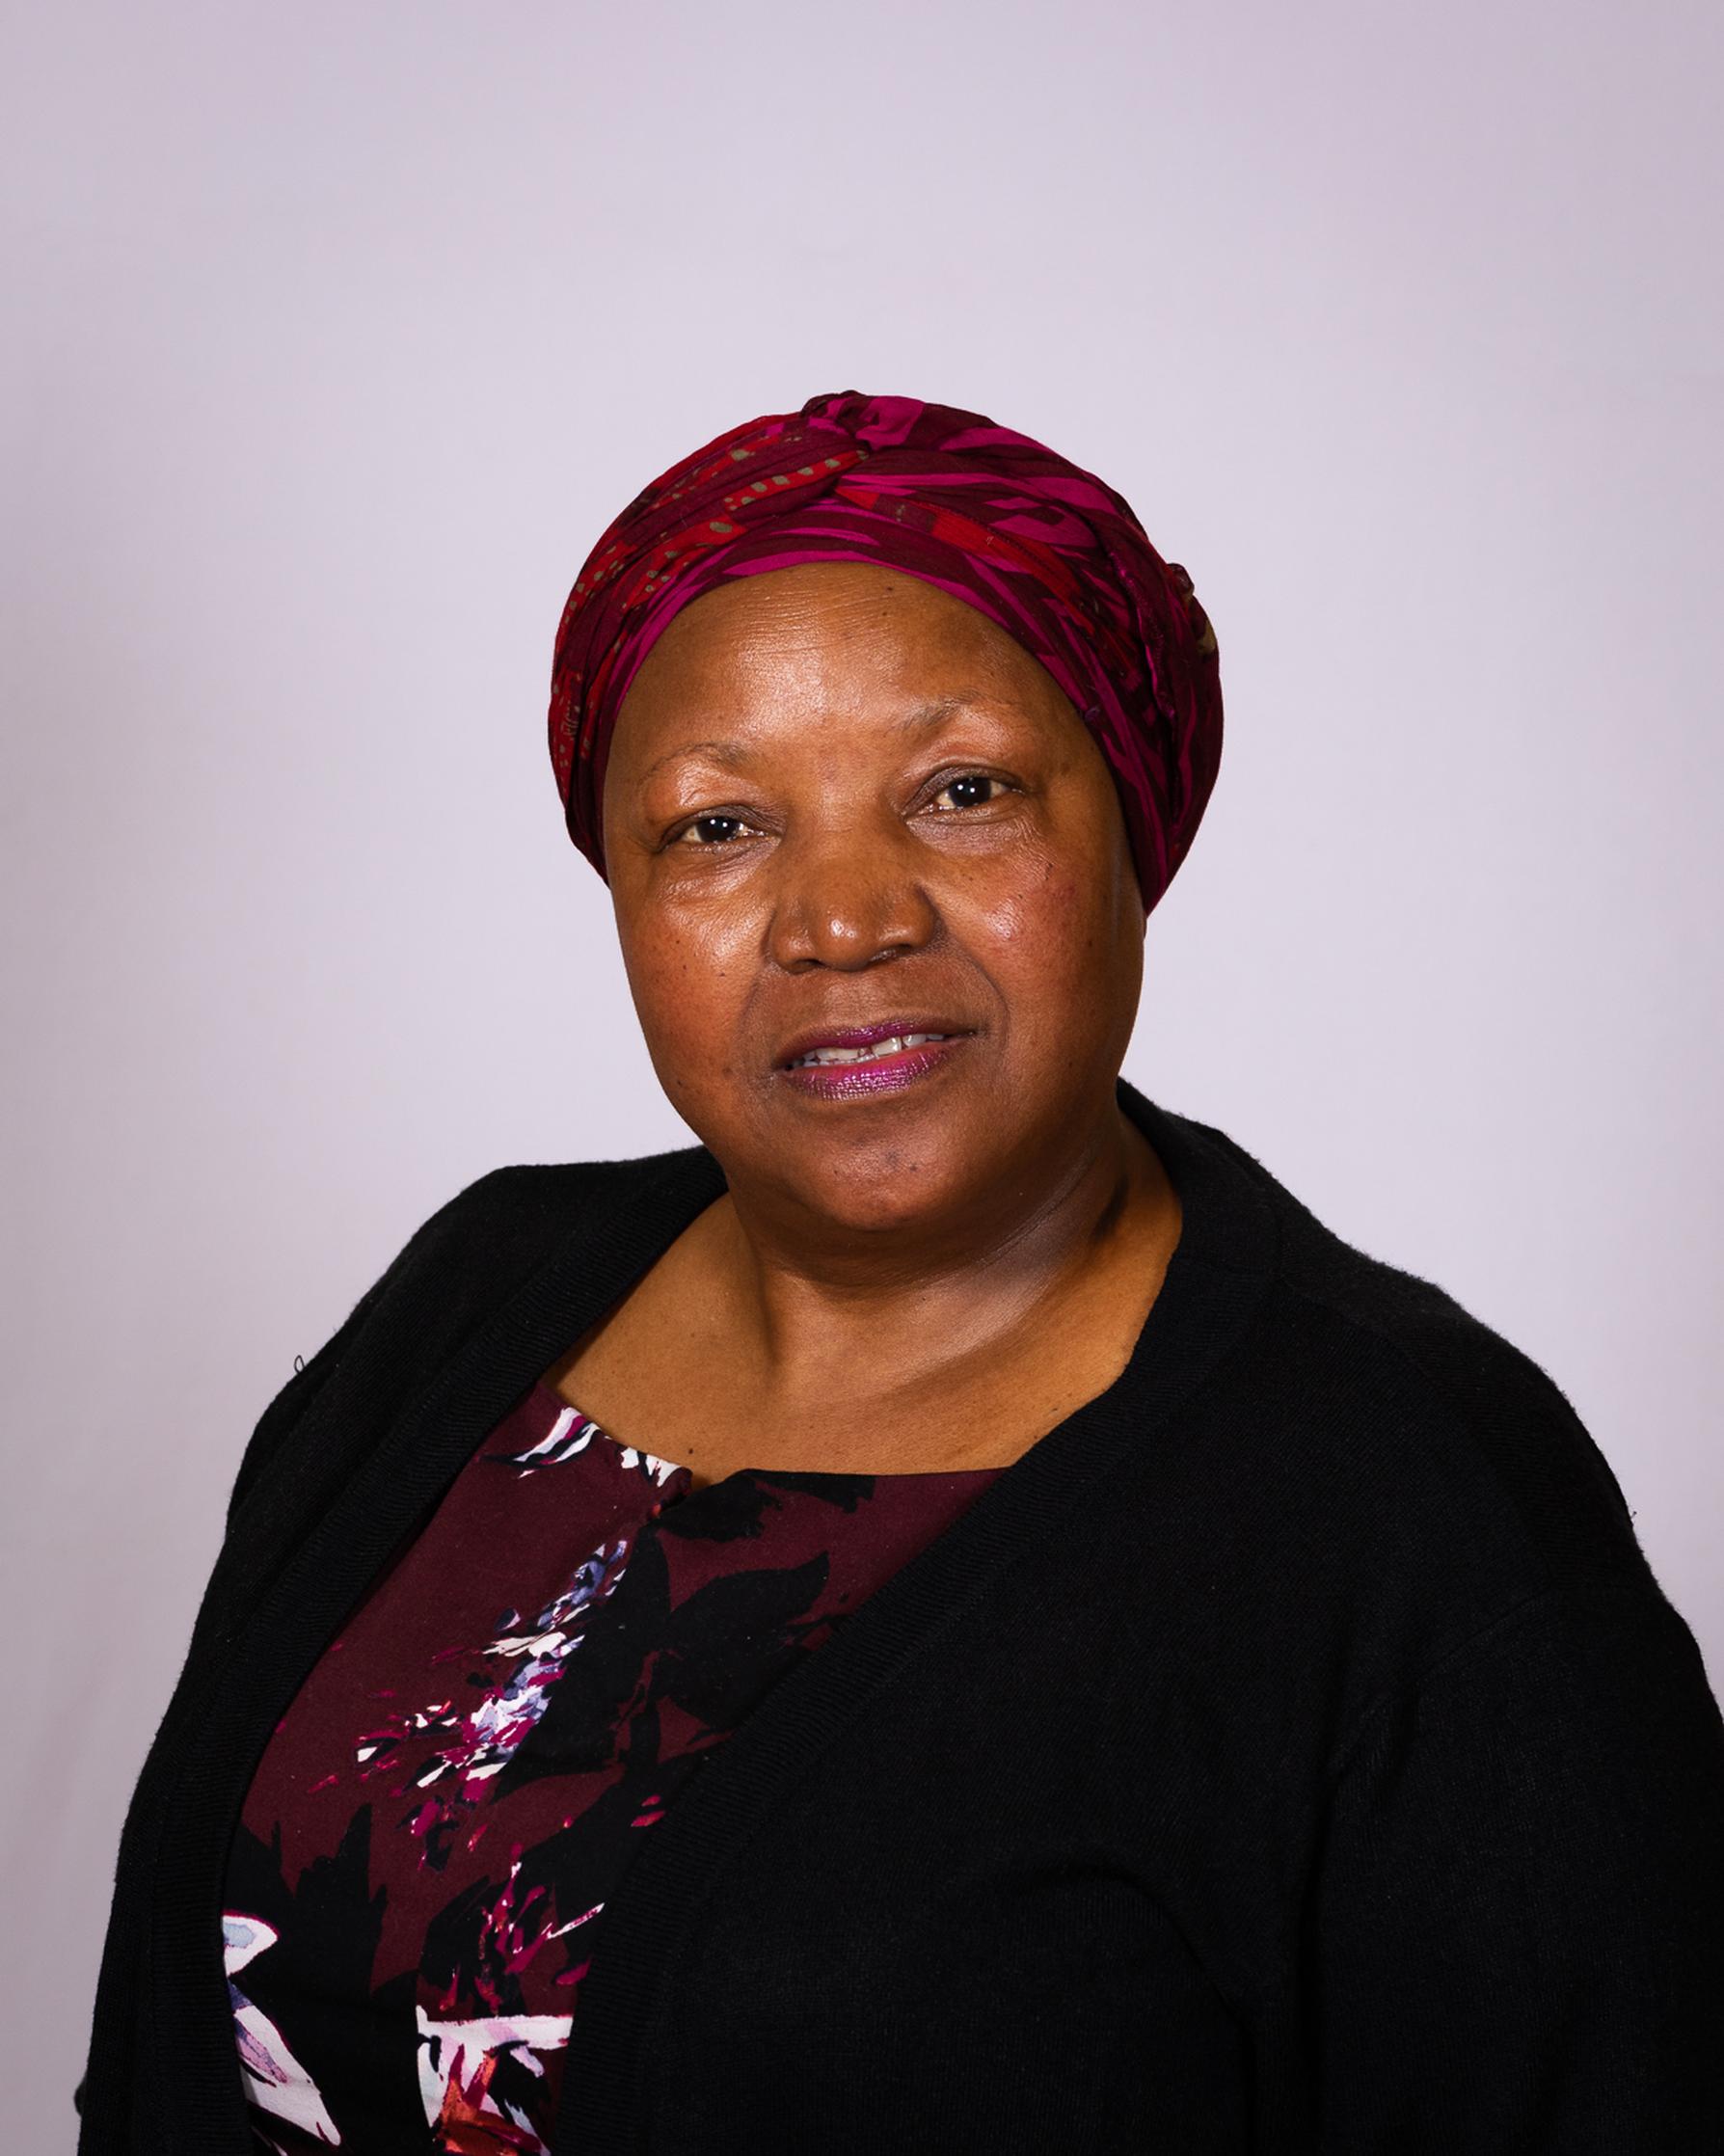 Cllr Averil Lekau: Changes to parking charges and permit costs will encourage residents and businesses to embrace more environmentally friendly travel